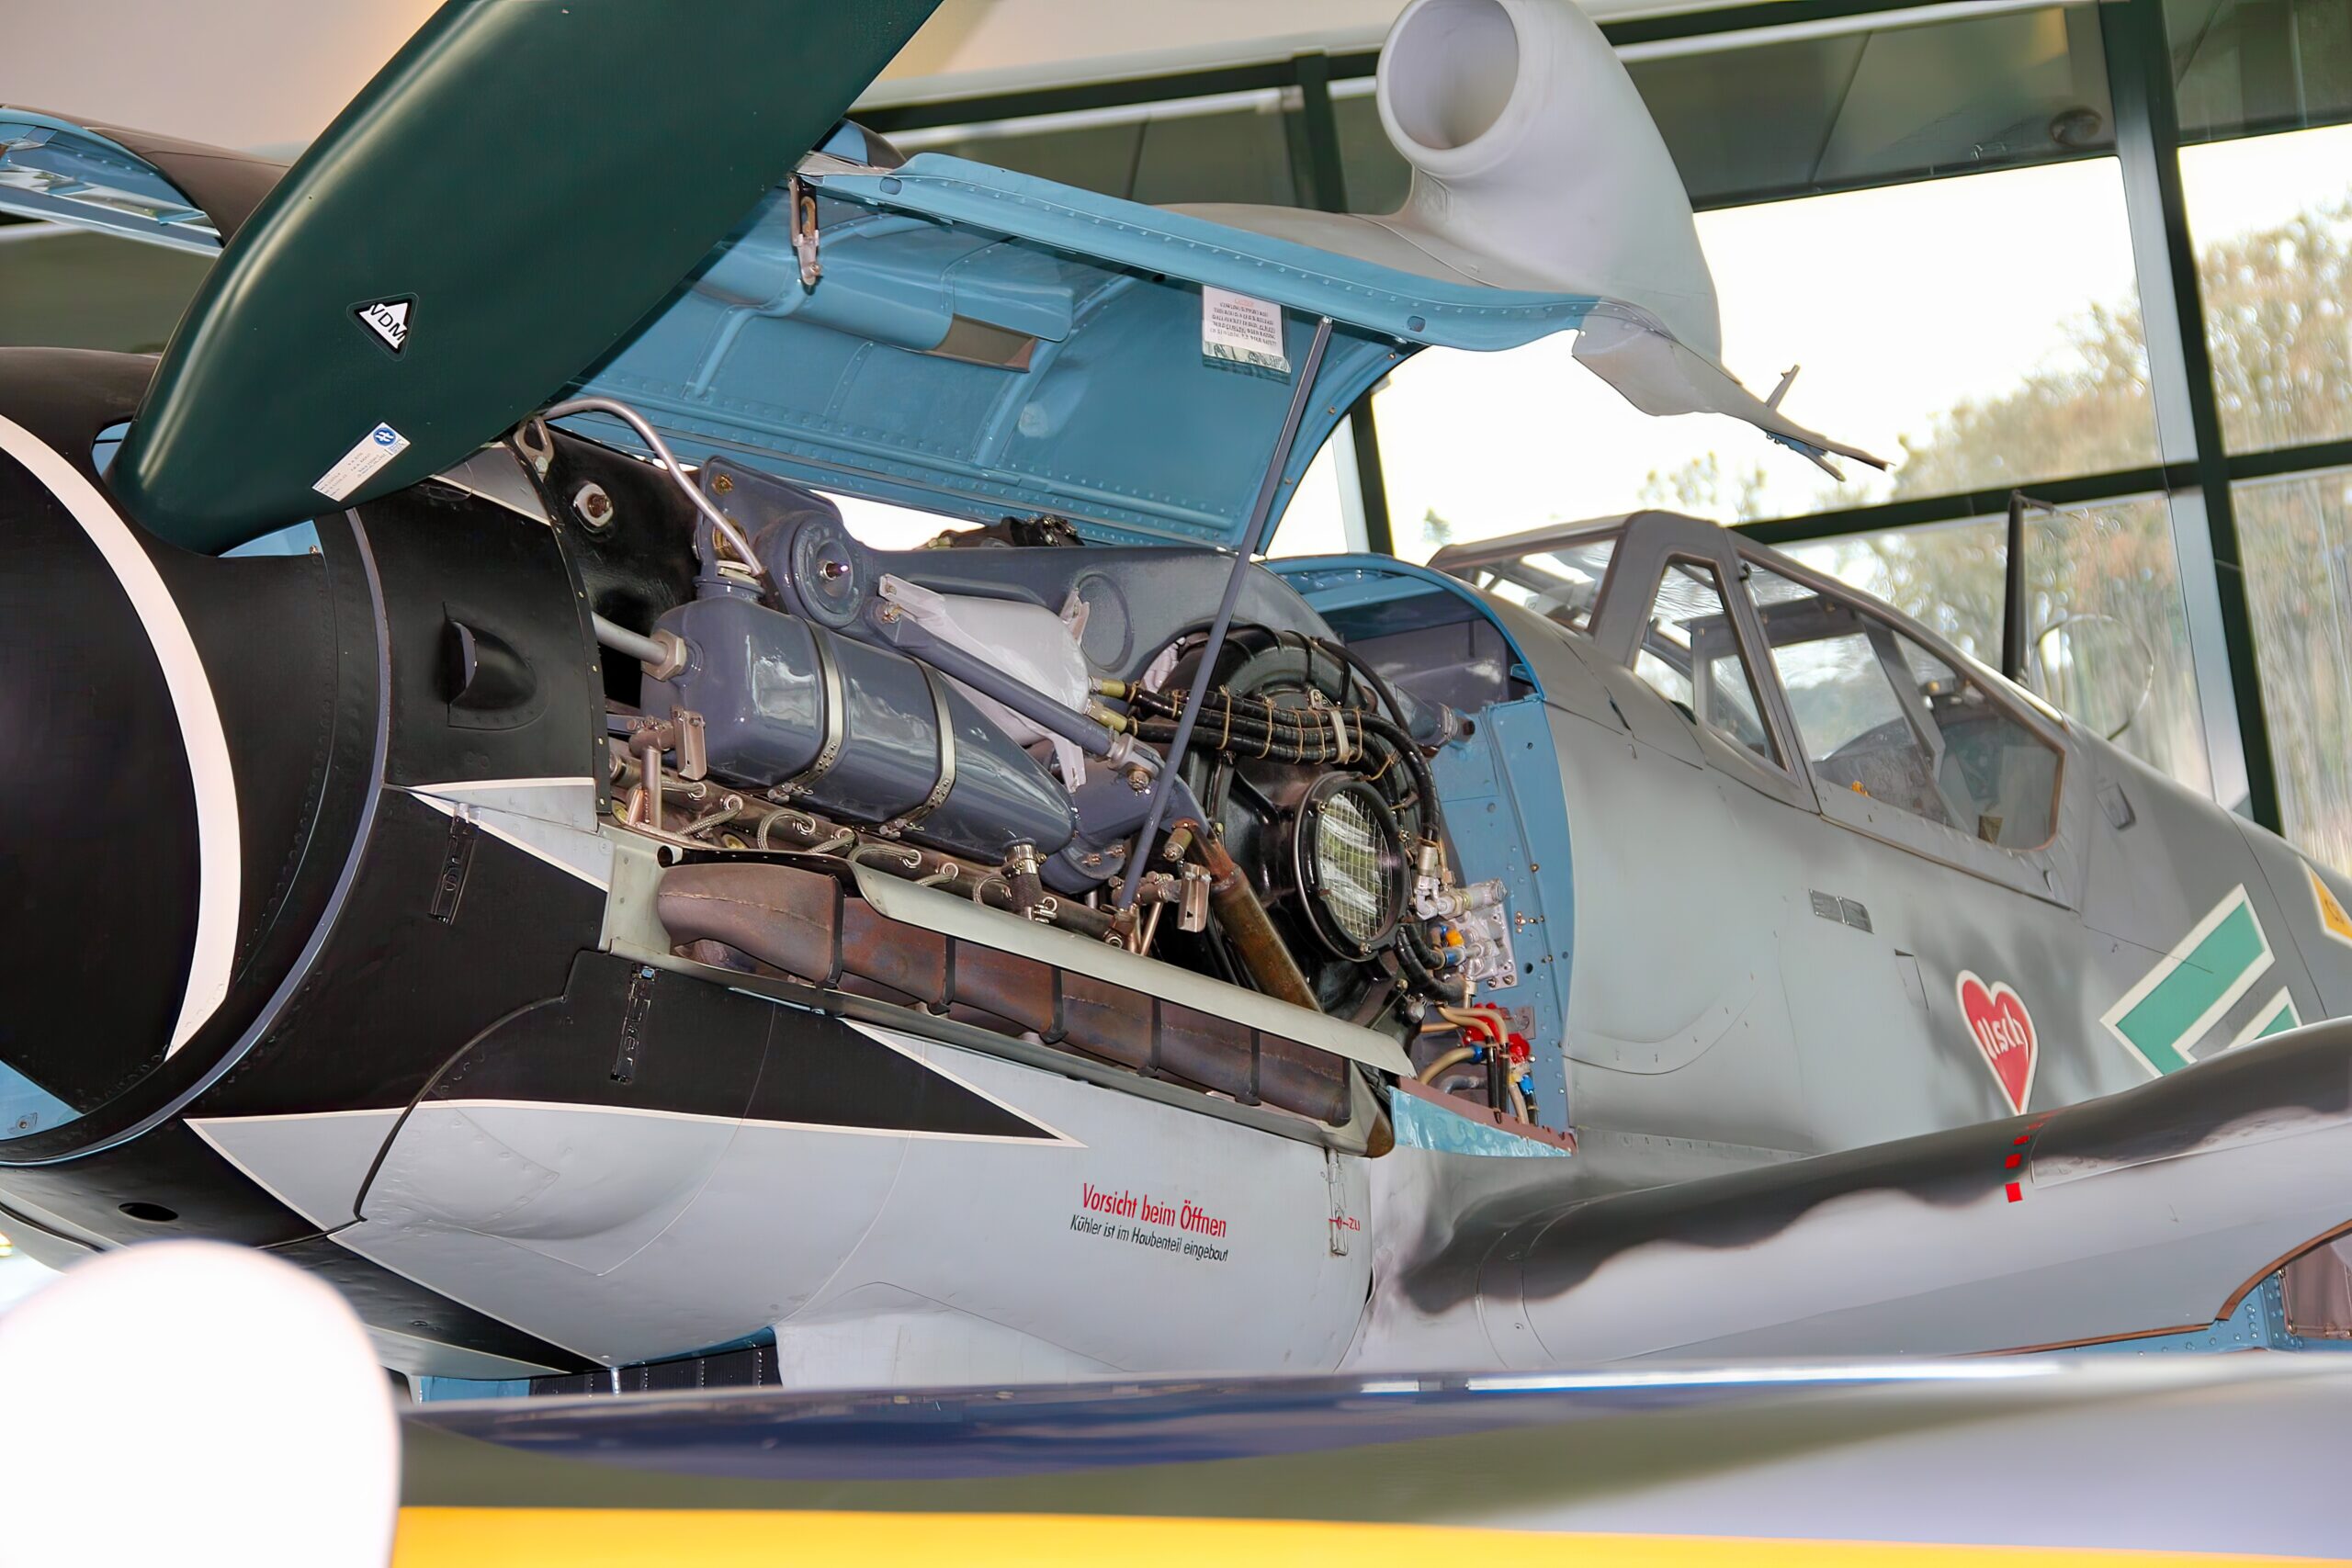 Bf 109 in the Hartmann color scheme on display at the Evergreen Aviation & Space Museum